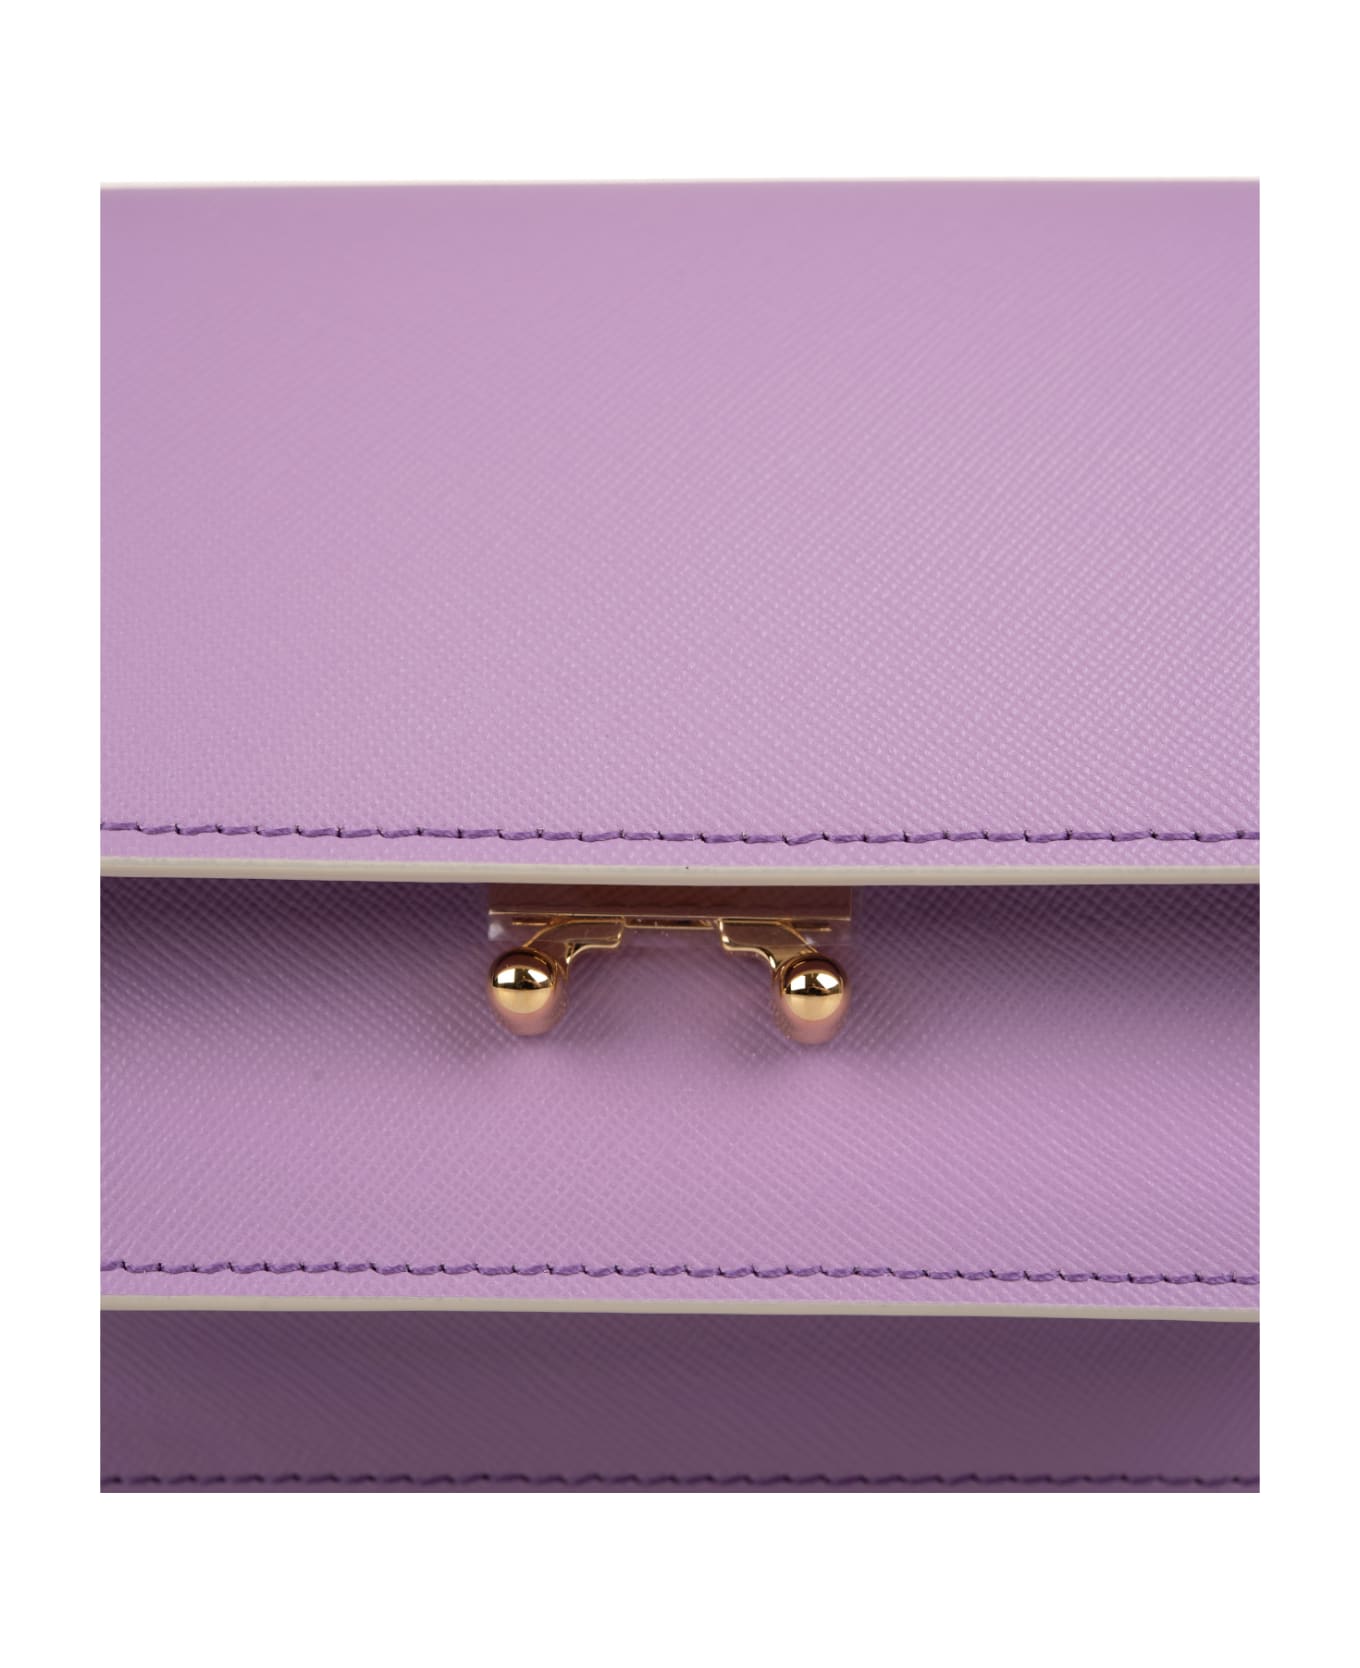 Marni Lilac East/west Trunk Bag In Saffiano Leather - Viola